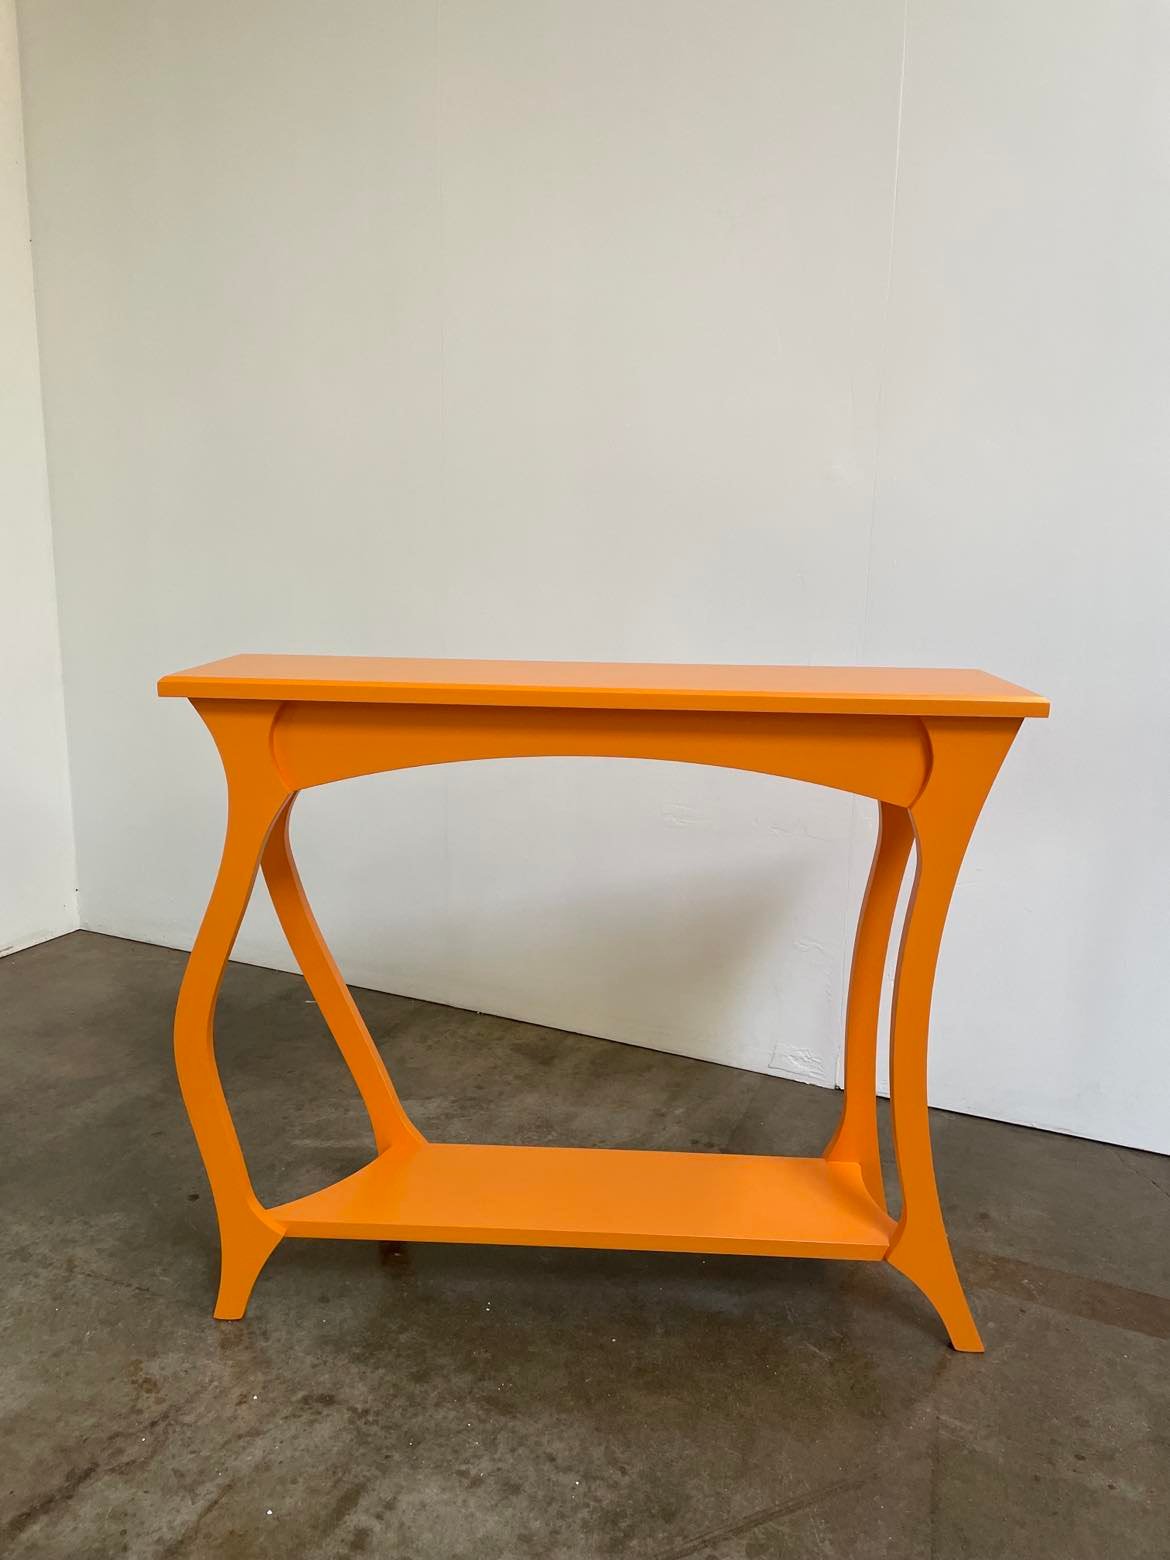 *SALE* - THE DANCING TABLE - THE HALL TABLE ON THE MOVE - TANGERINE PAINT